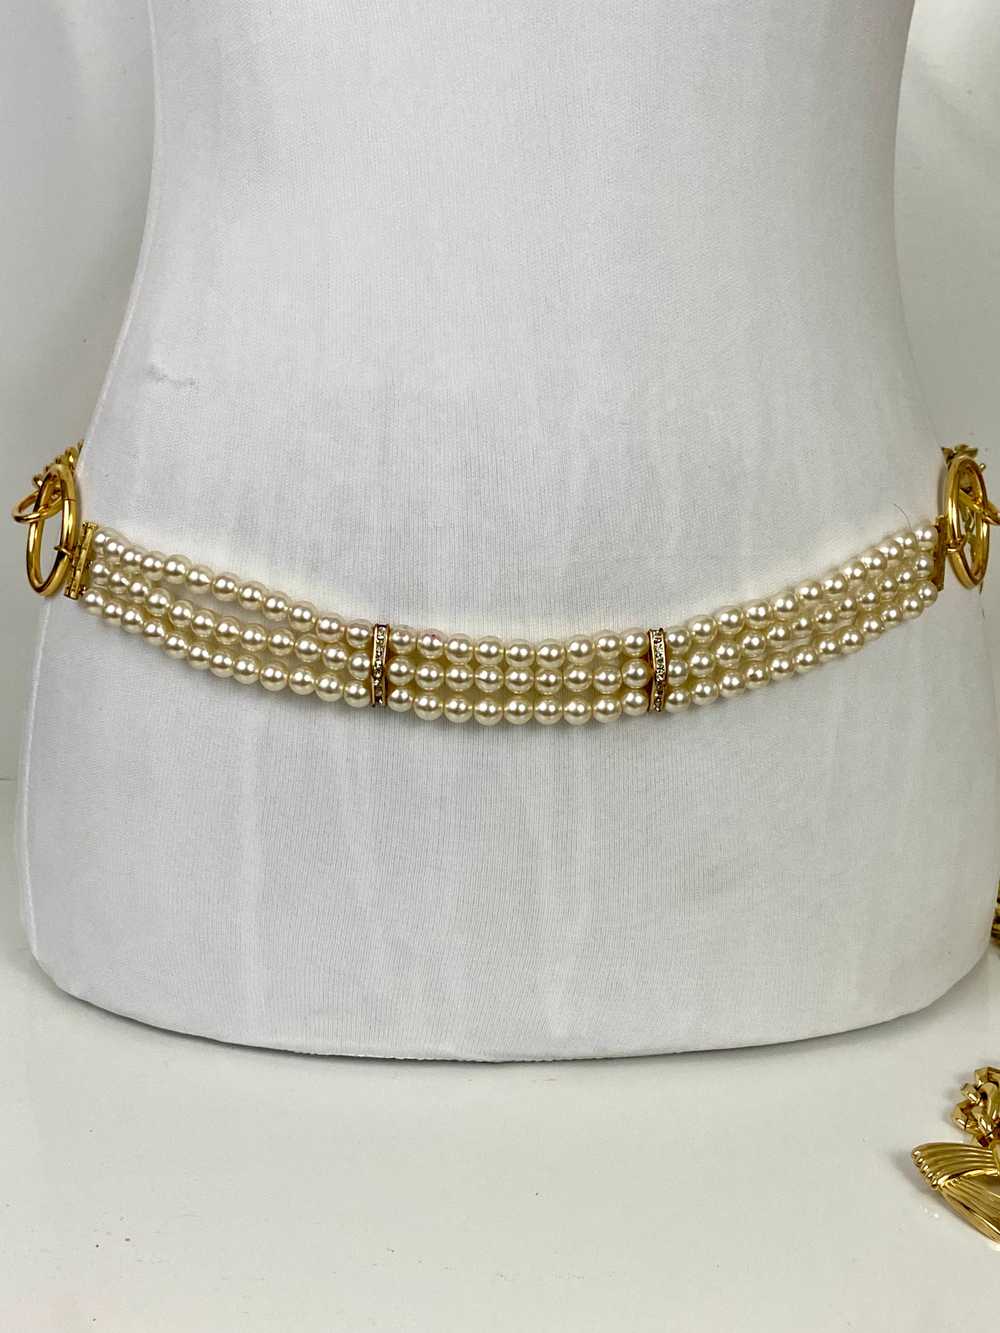 Pearl and gold belt - image 2